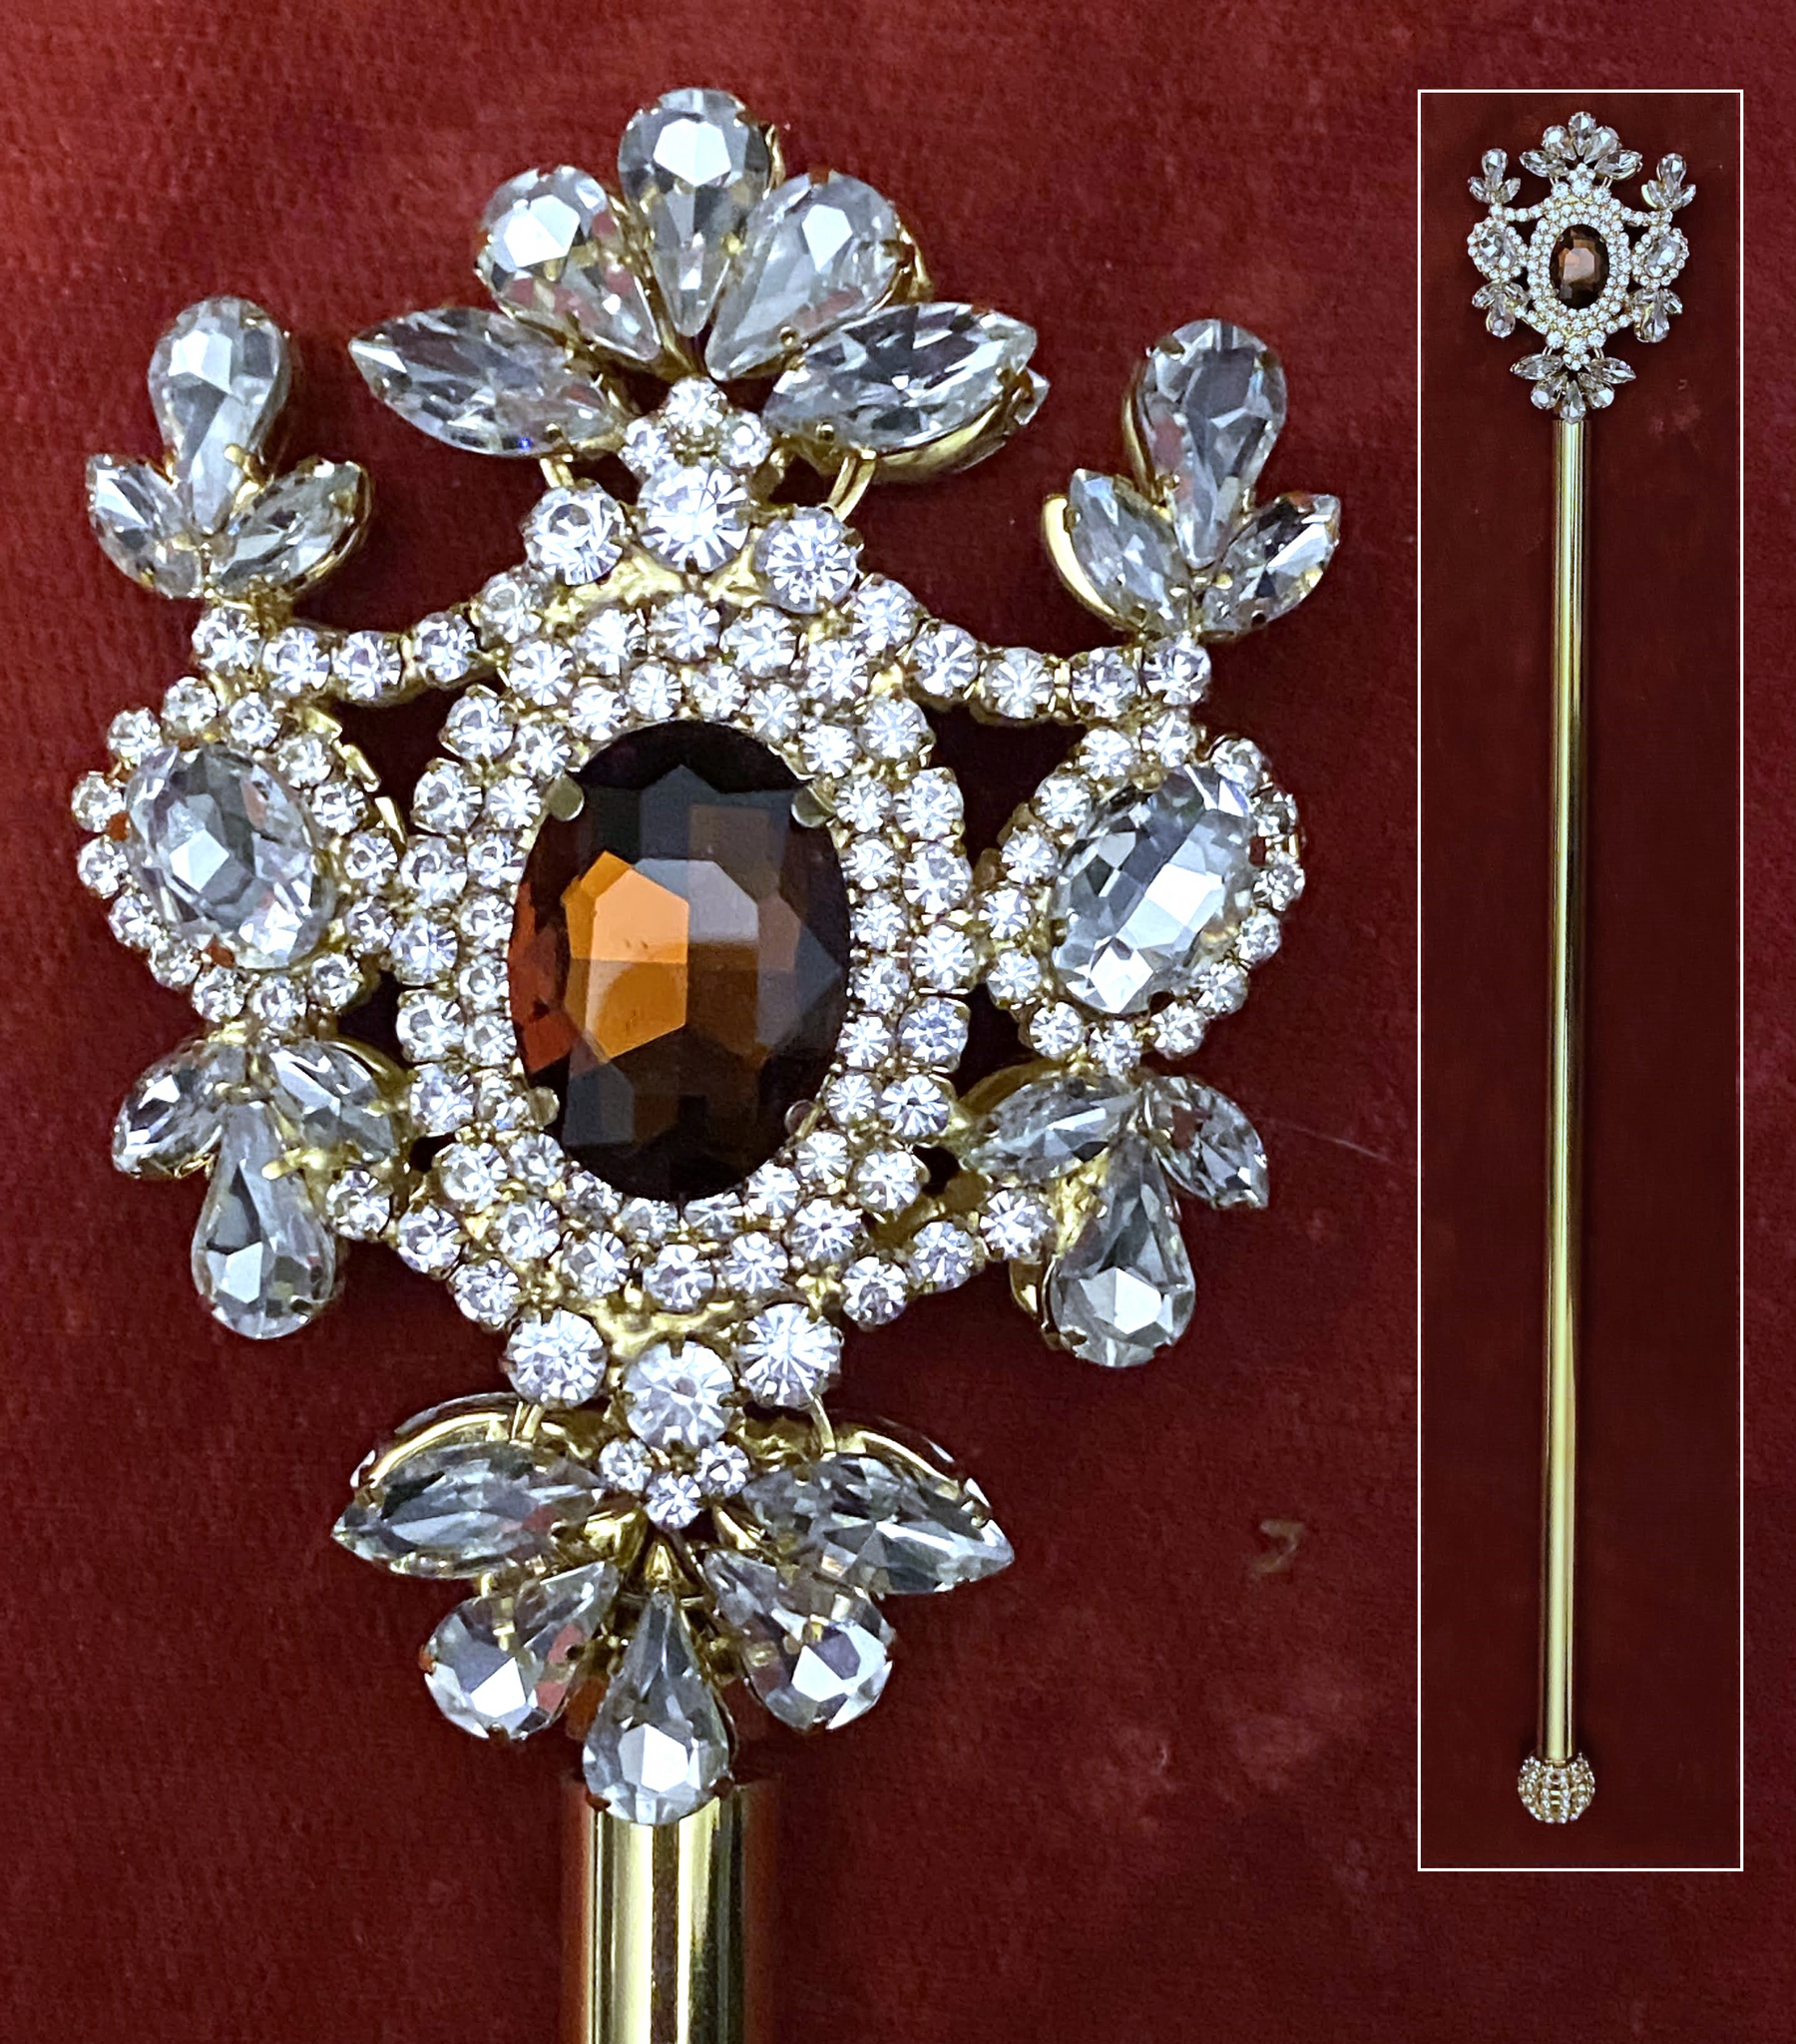 Russian Imperial  Dynasty Palace Gold  Dark Amber  Rhinestone Scepter